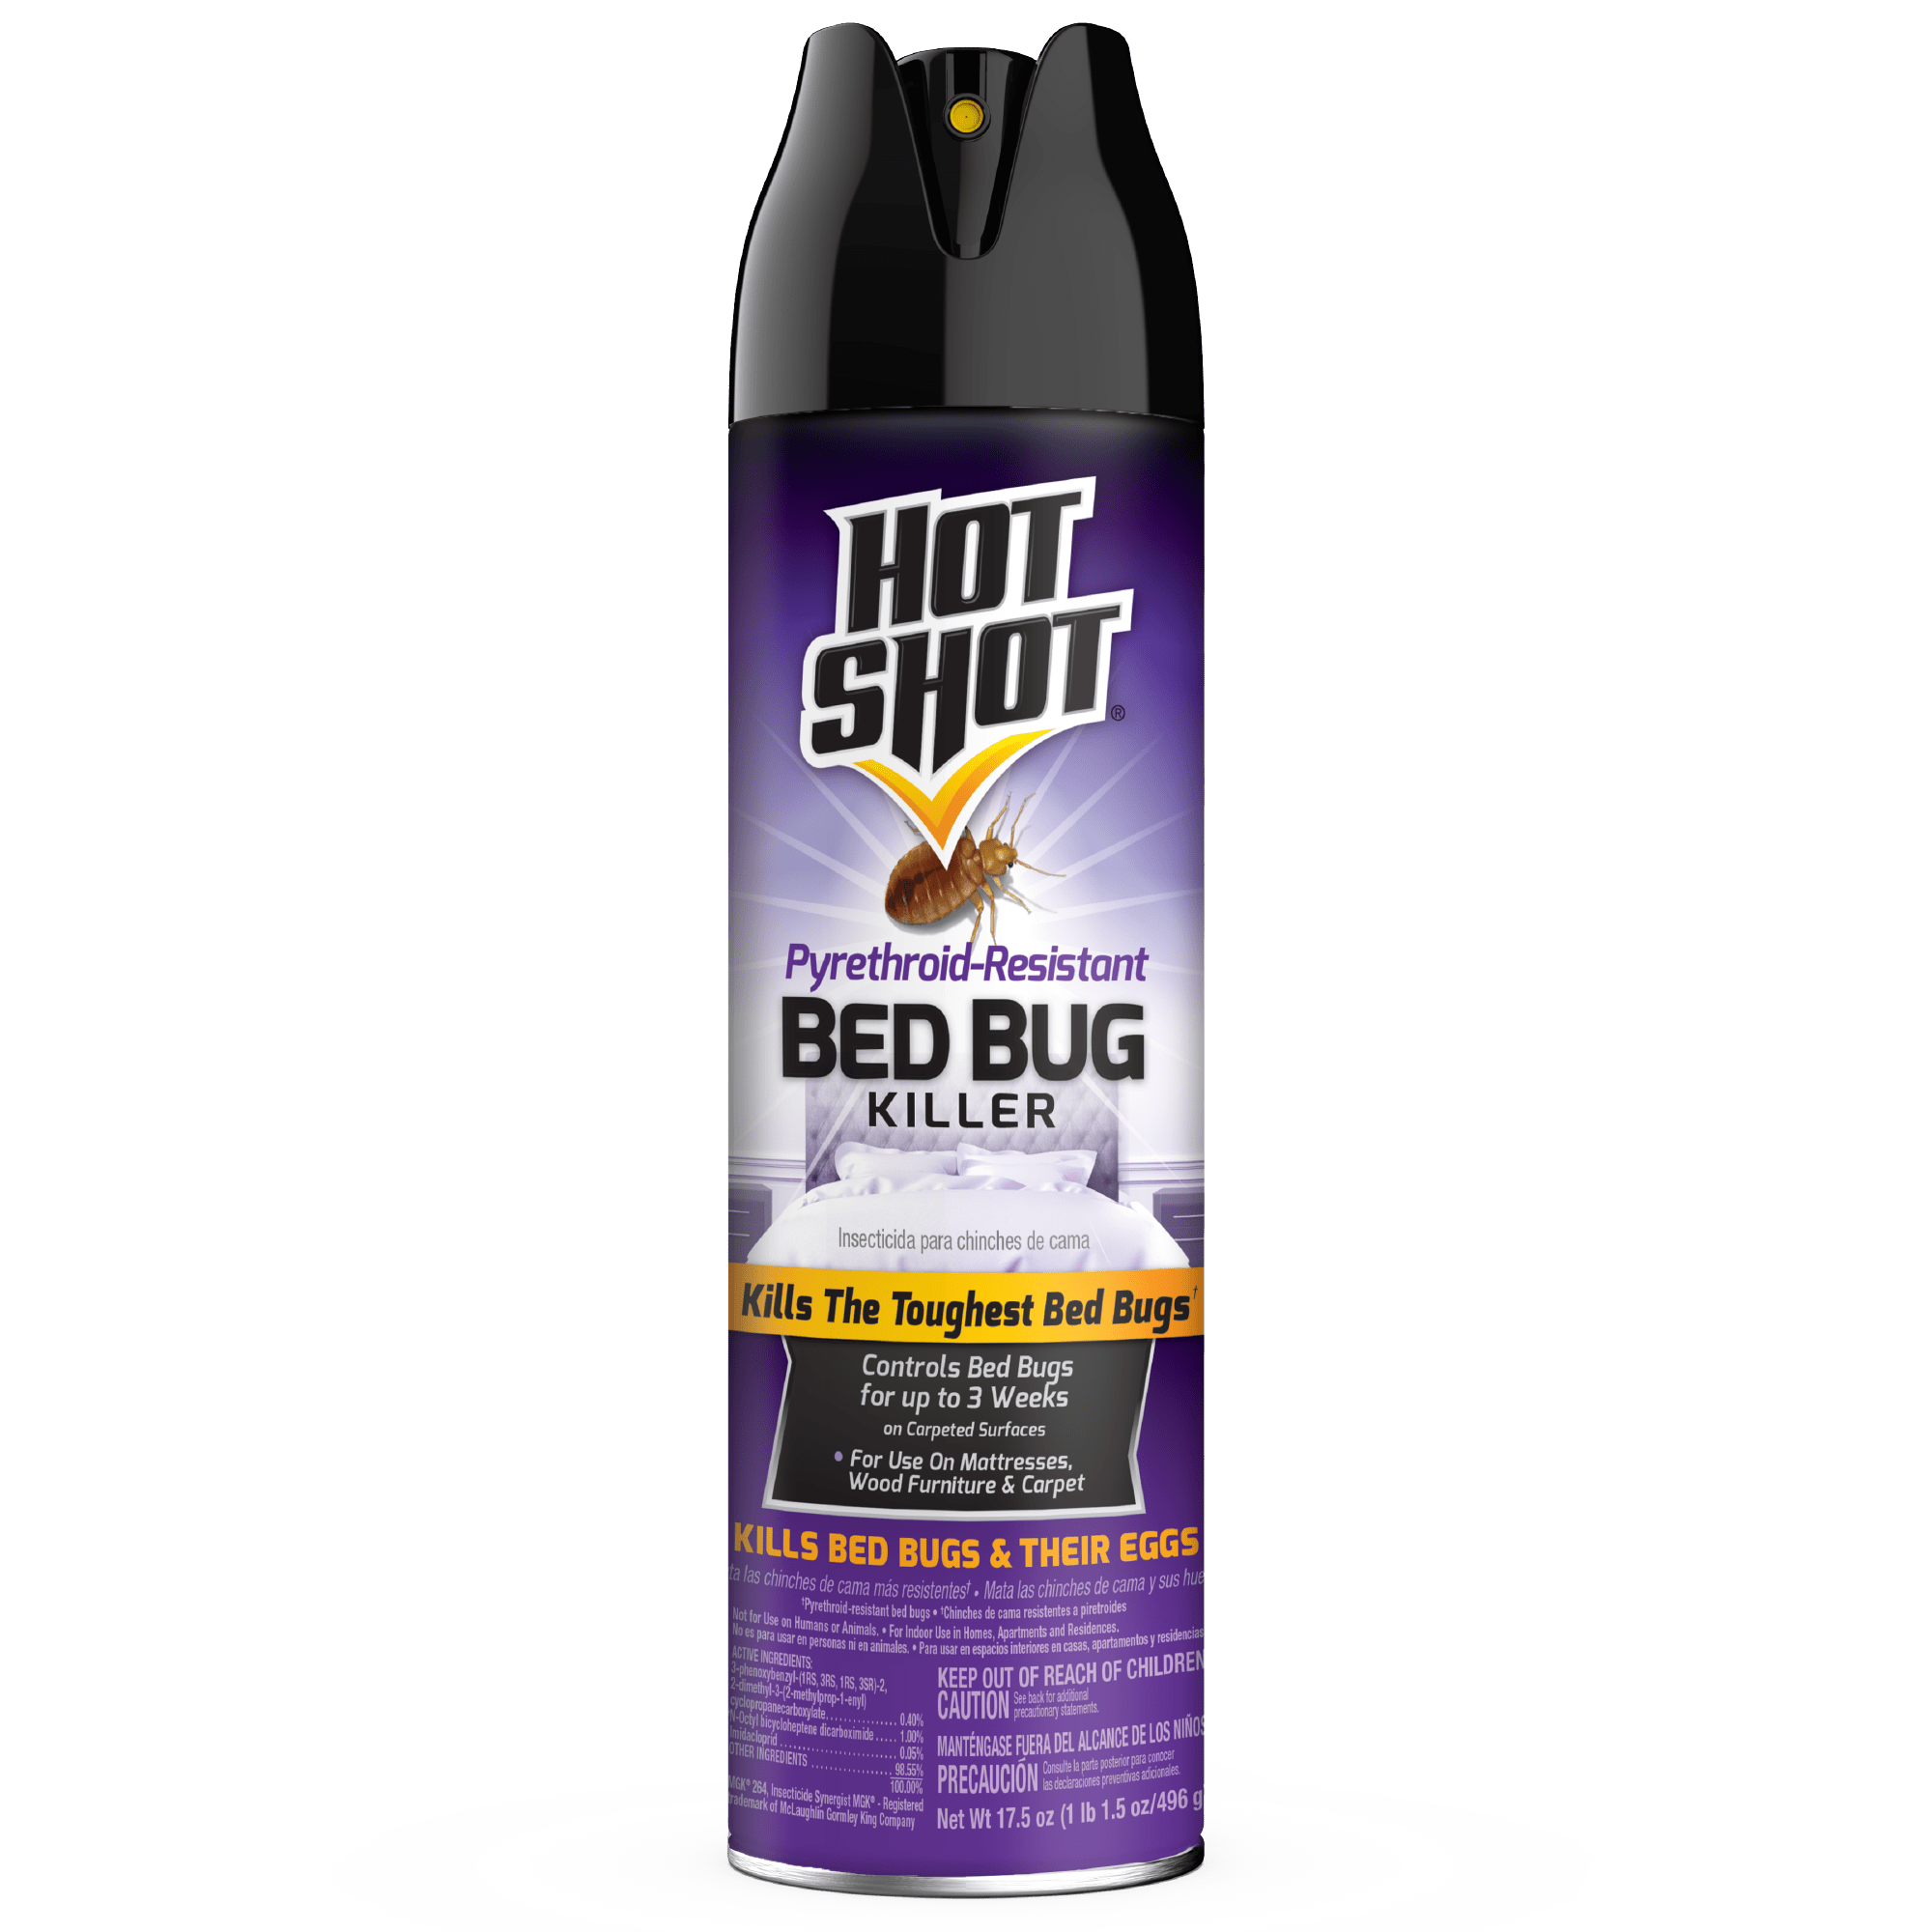 How Long to Wait After Spraying for Bed Bugs?